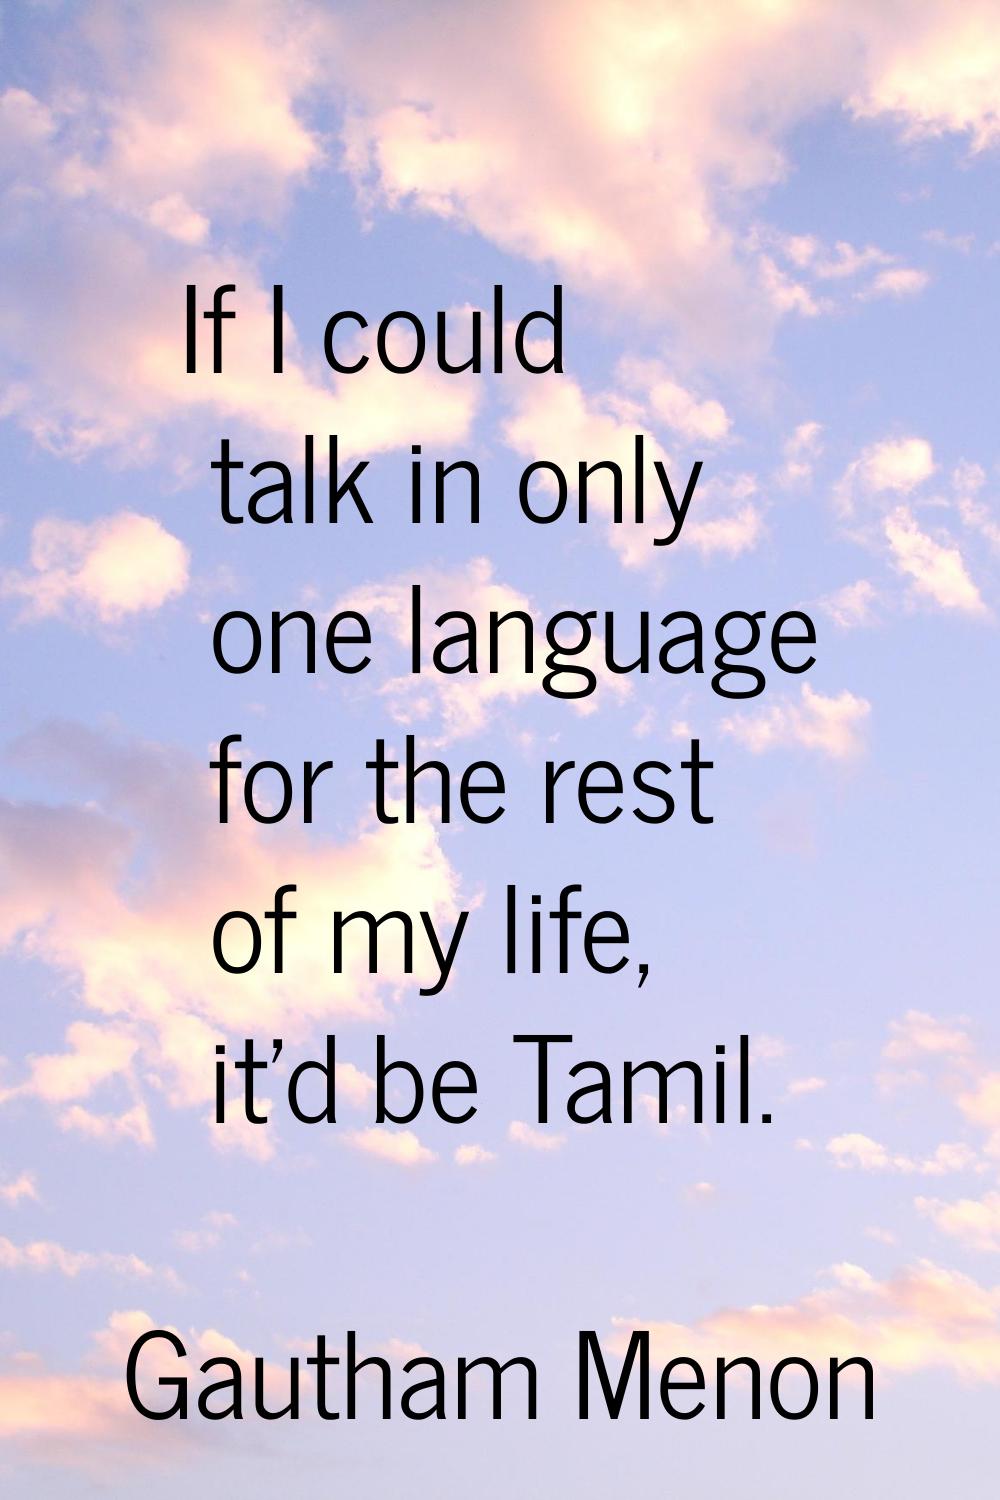 If I could talk in only one language for the rest of my life, it'd be Tamil.